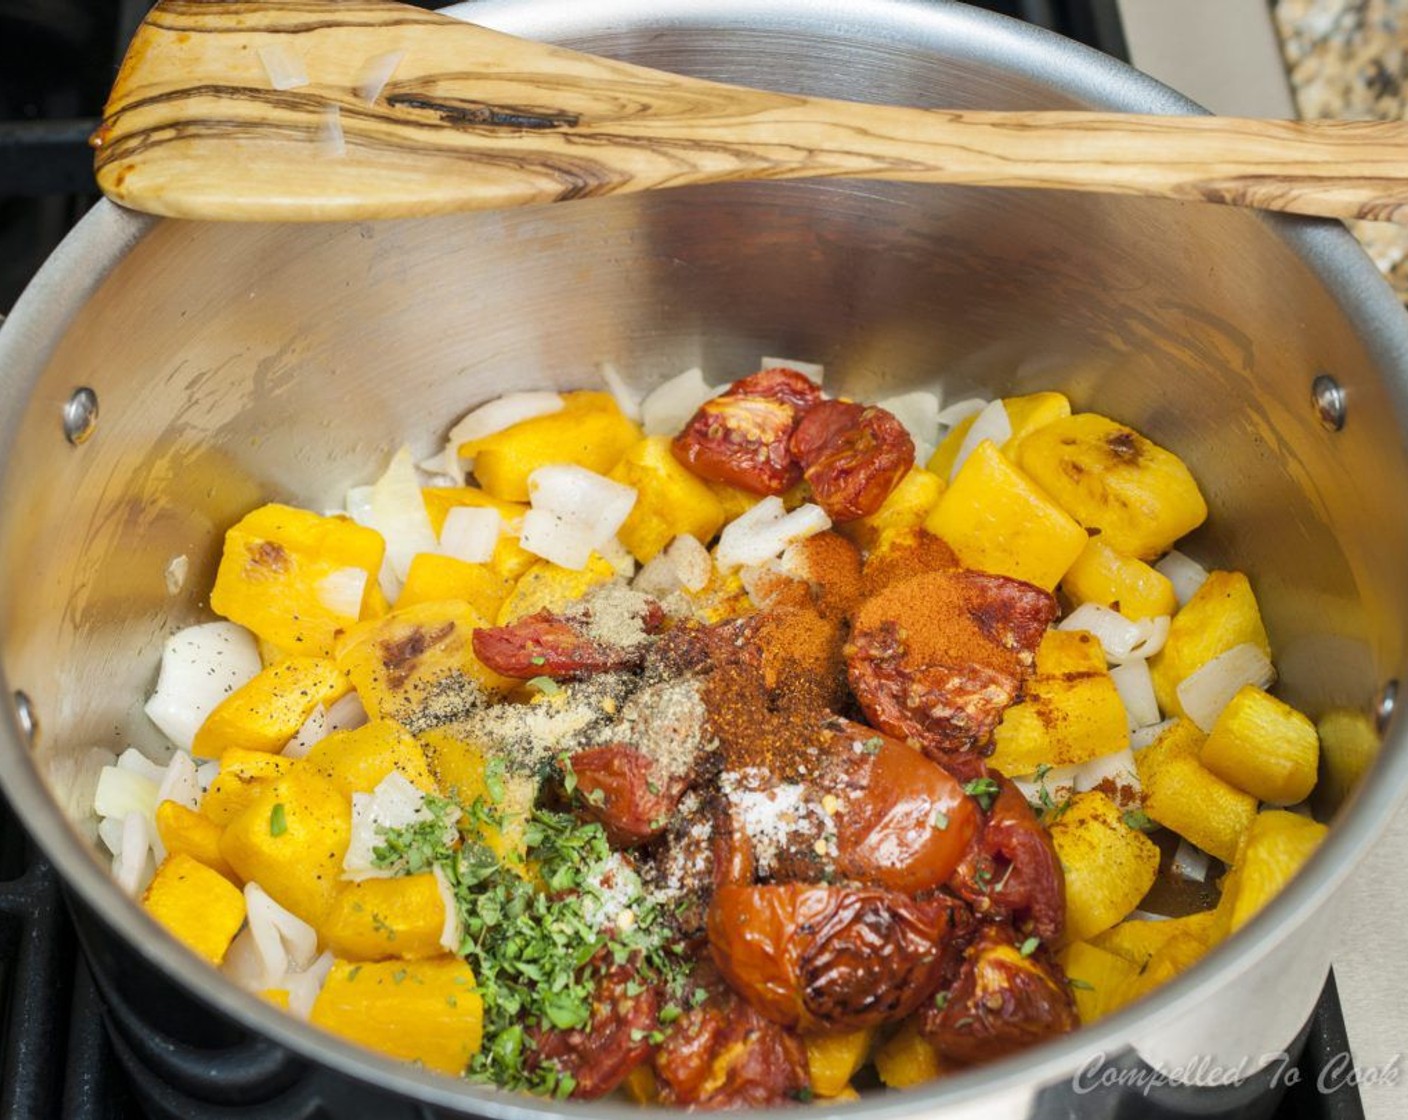 step 8 To the pot add roasted vegetables, Chicken Broth (4 cups), Fresh Oregano (1 Tbsp), Smoked Paprika (1/2 tsp), Dry Mustard (1/2 tsp), Dried Sage (1/4 tsp), Salt (1/2 tsp), Ground Black Pepper (1/2 tsp), Chili Powder (1/4 tsp), and Crushed Red Pepper Flakes (1 pinch). Cover and simmer for a minimum 30 minutes.